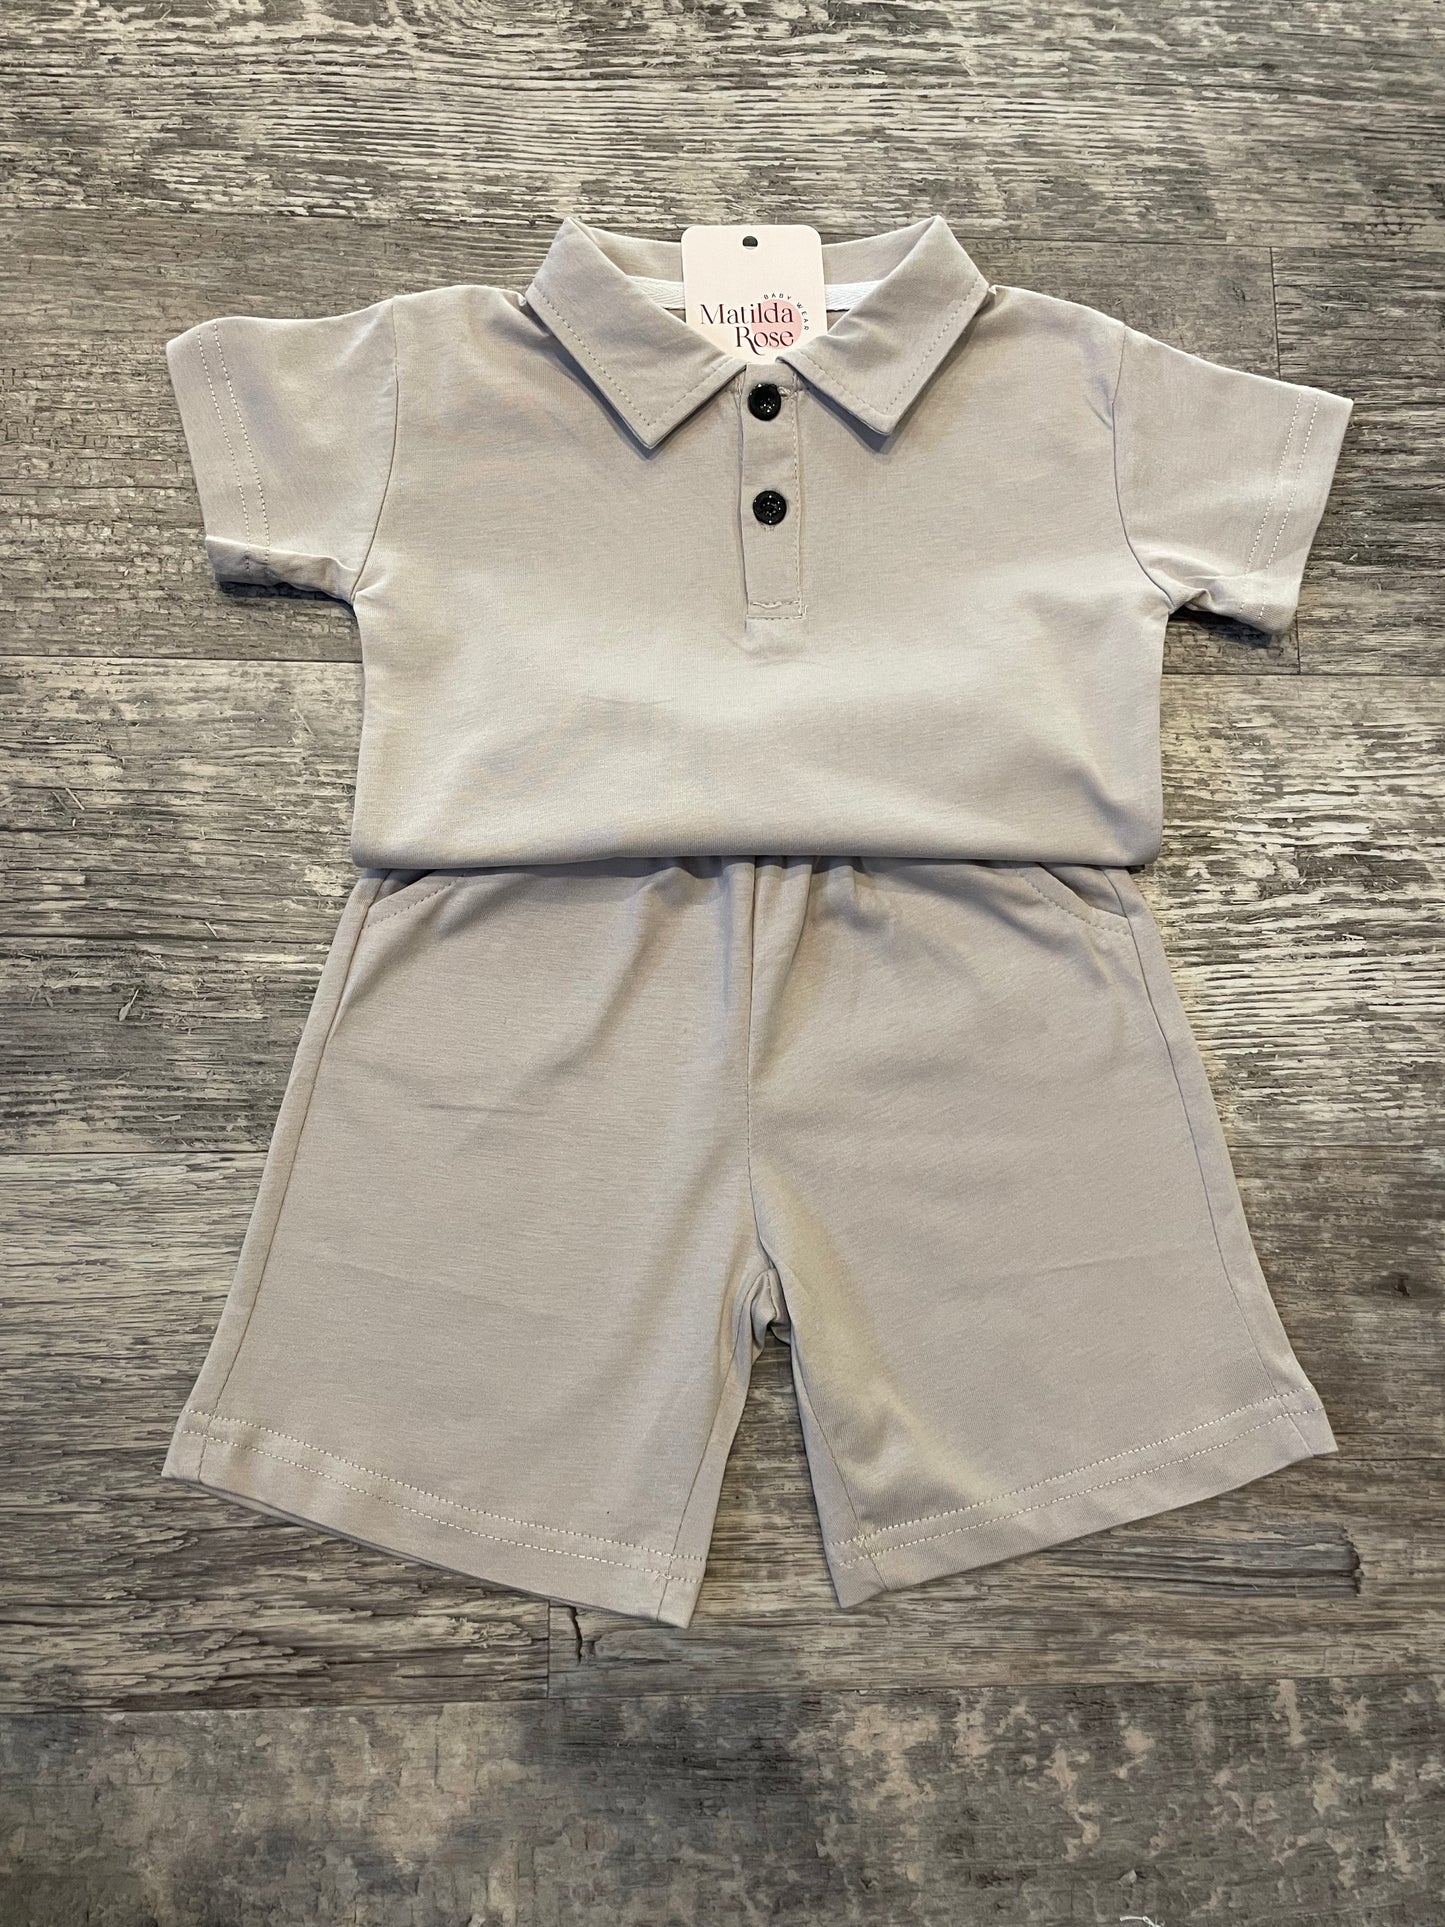 The personalised grey polo set